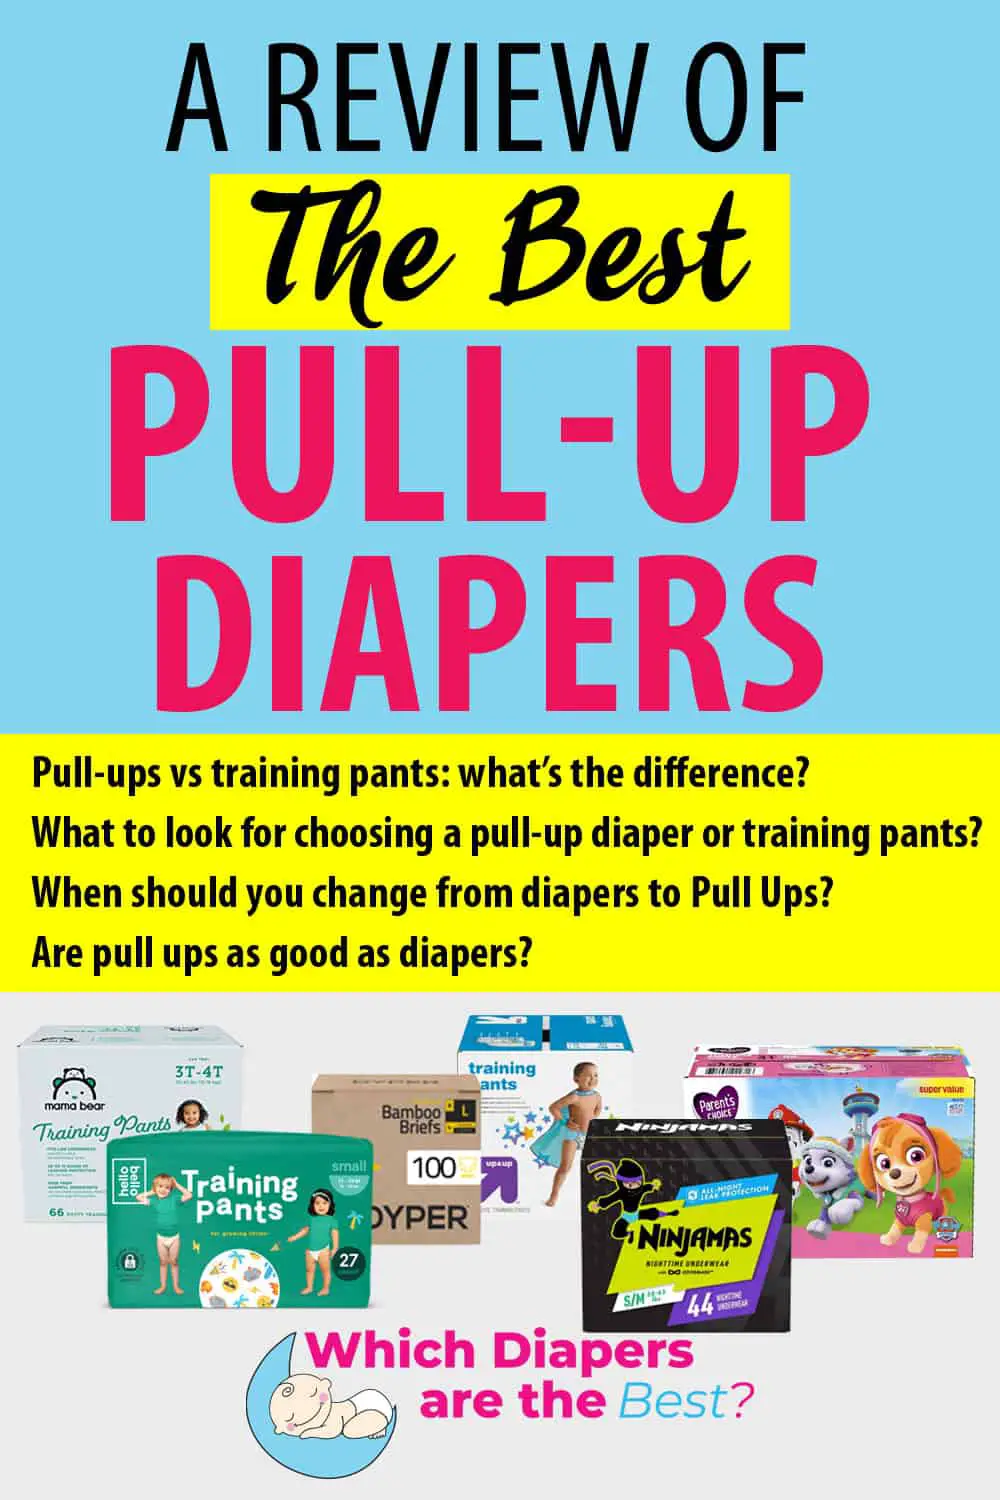 Best pull-up diapers pinterest pin